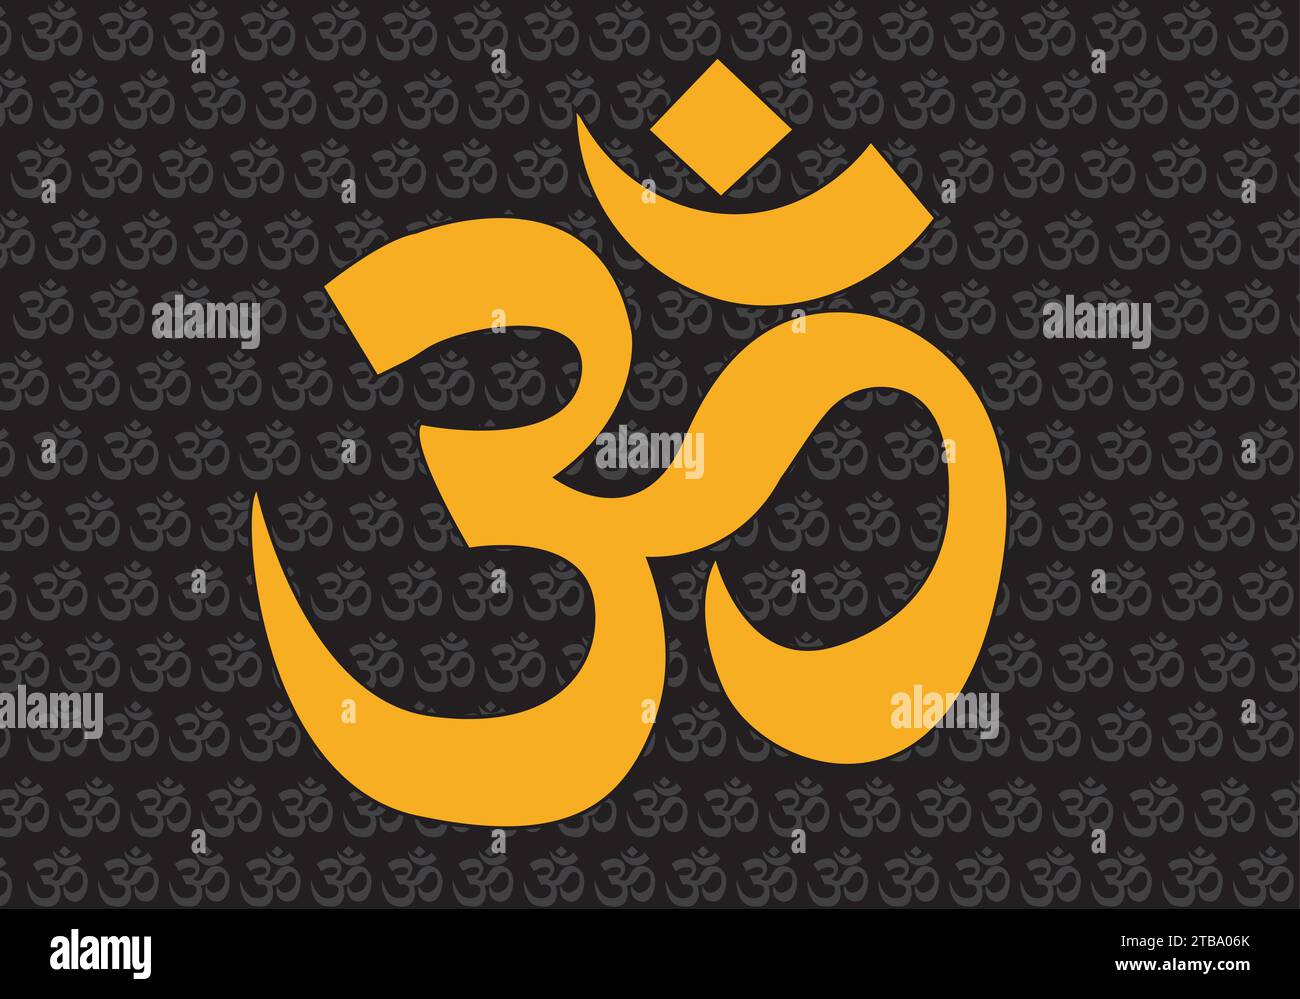 Aum Om symbol with seamless  background Stock Vector